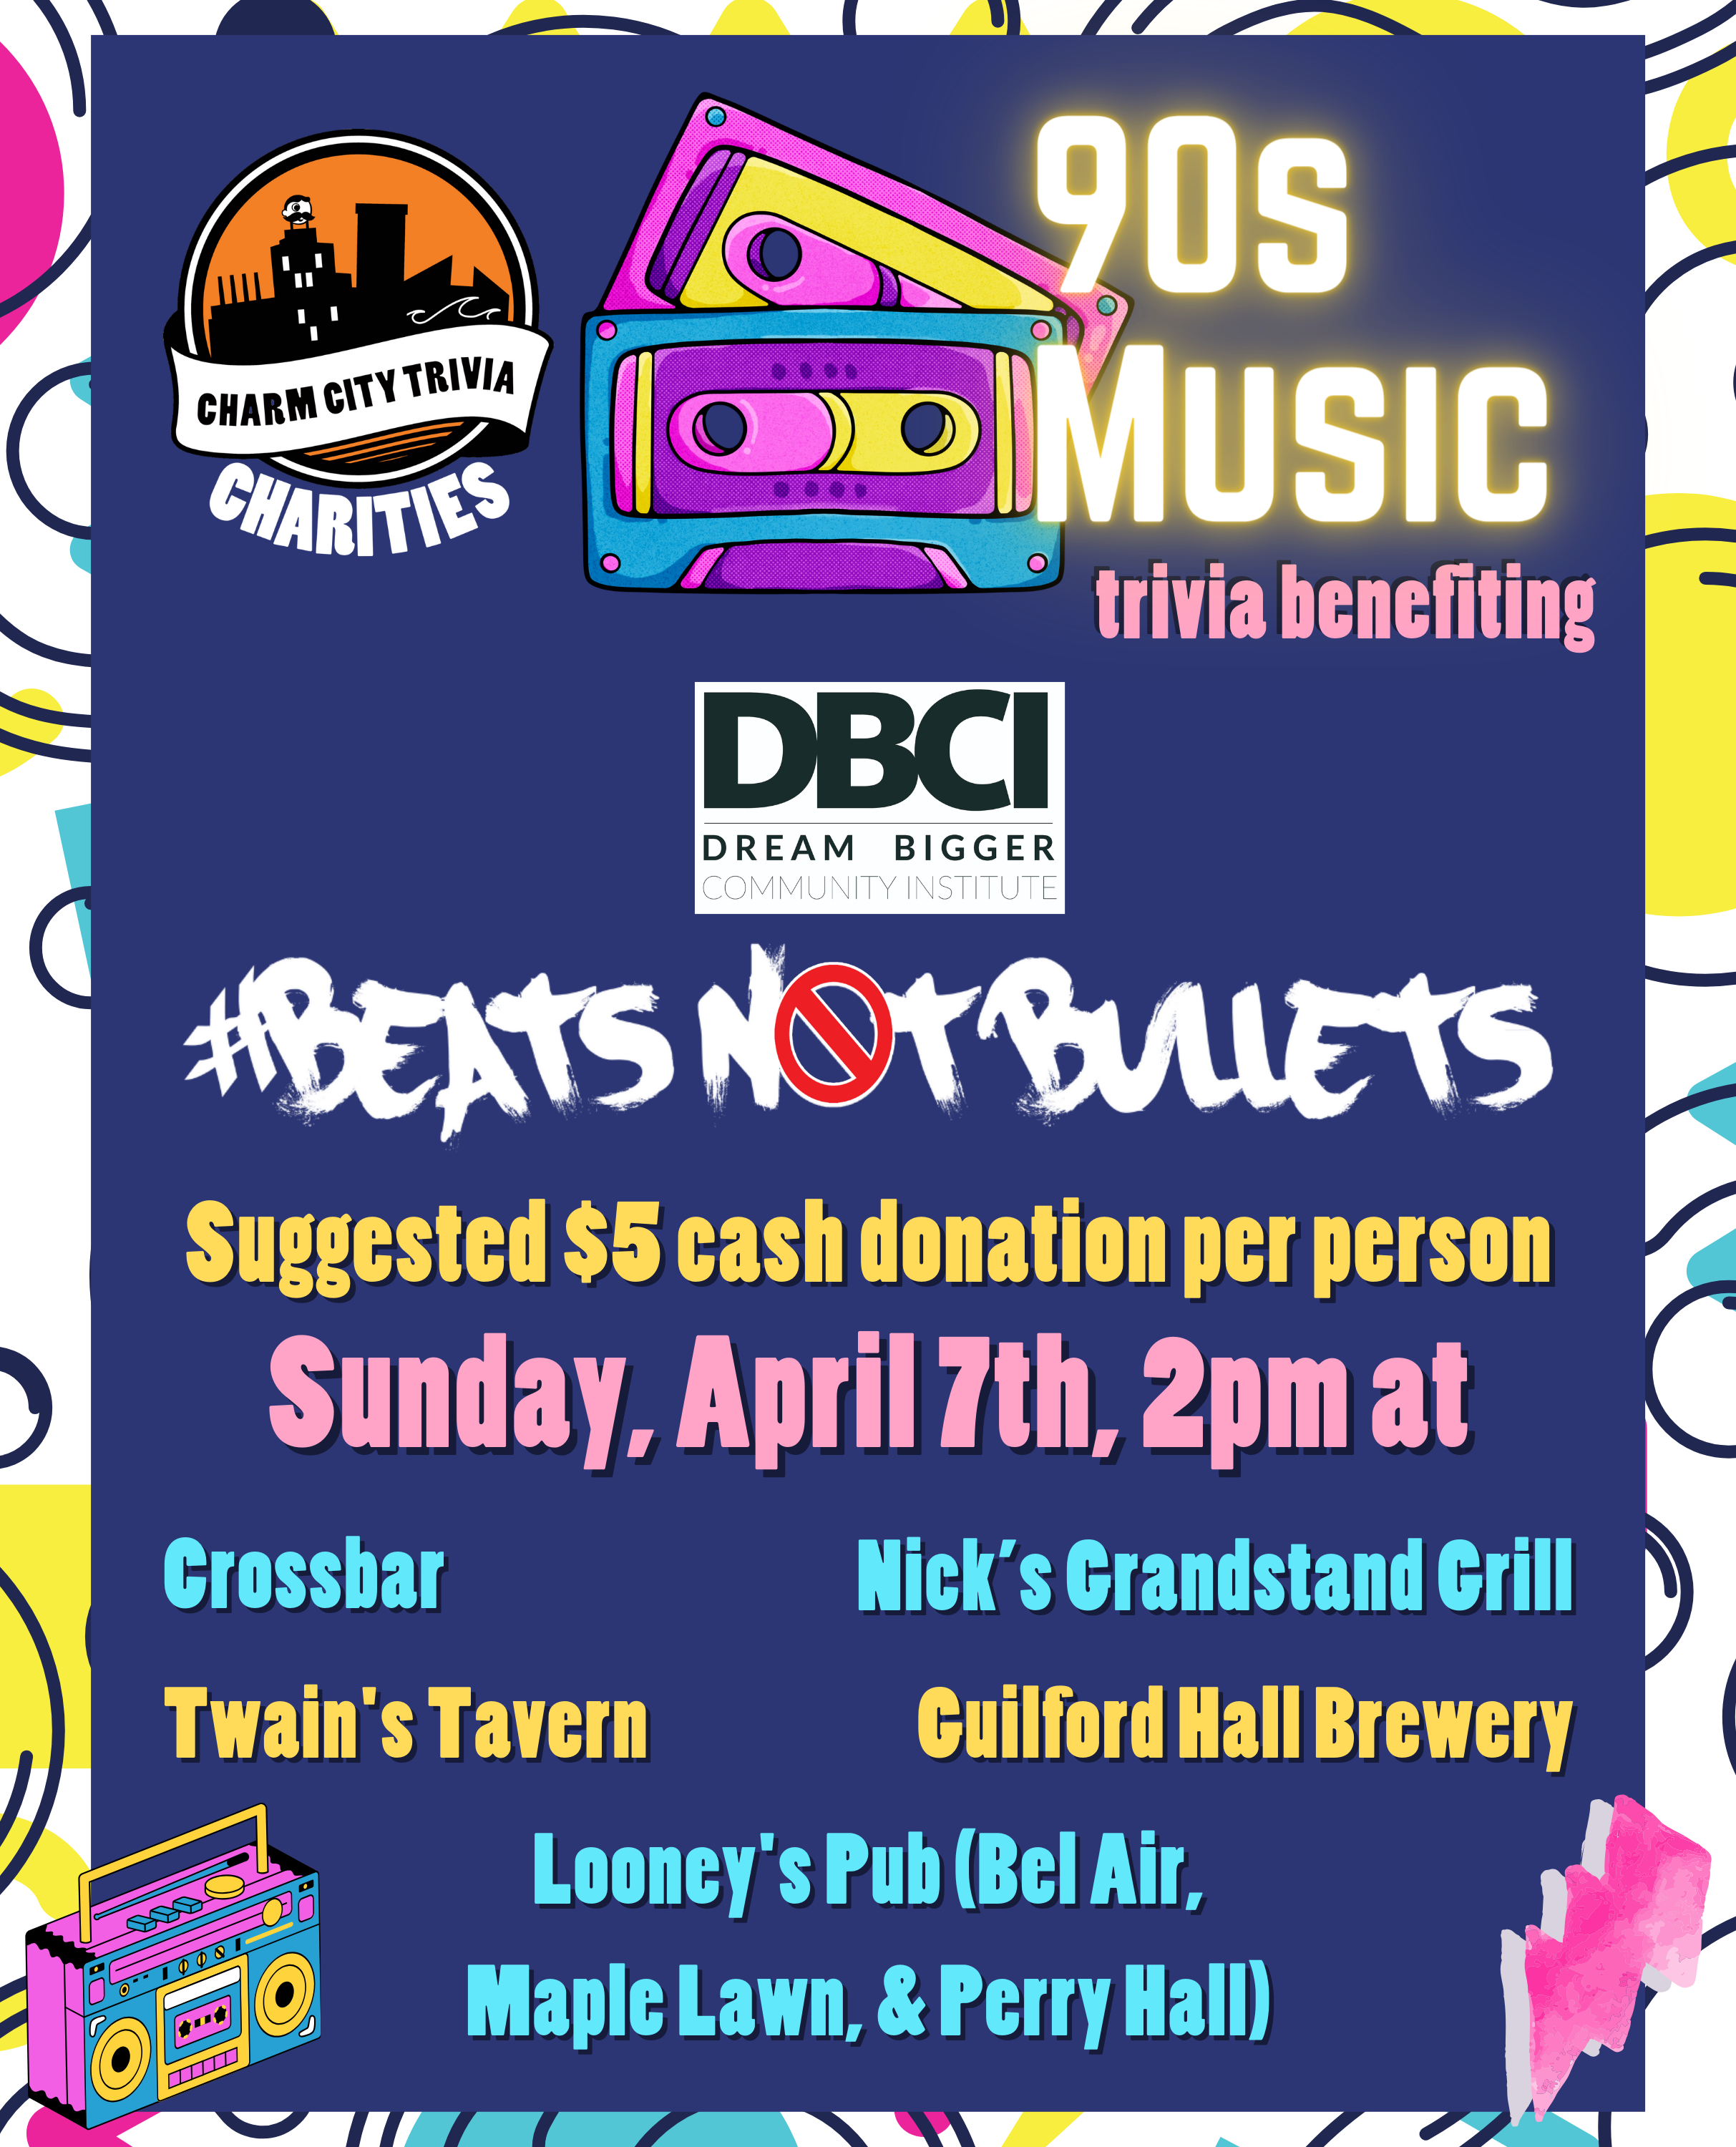 a colorful 90s background with a dark blue rectangle centered behind the text, the Charm City Trivia Charities logo, the Dream Bigger Community Institute logo, the Beats Not Bullets logo, colorful cassette tapes, a colorful boombox, a pink lightning bolt, and yellow, pink, and blue text. The text reads: 90s Music trivia benefiting Dream Bigger Community Institute #Beats Not Bullets. Suggested $5 cash donation per person. Sunday, April 7th, 2pm at. Crossbar. Guilford Hall Brewery. Nick's Grandstand Grill. Twain's Tavern. Looney's Pub (Bel Air, Maple Lawn, & Perry Hall)